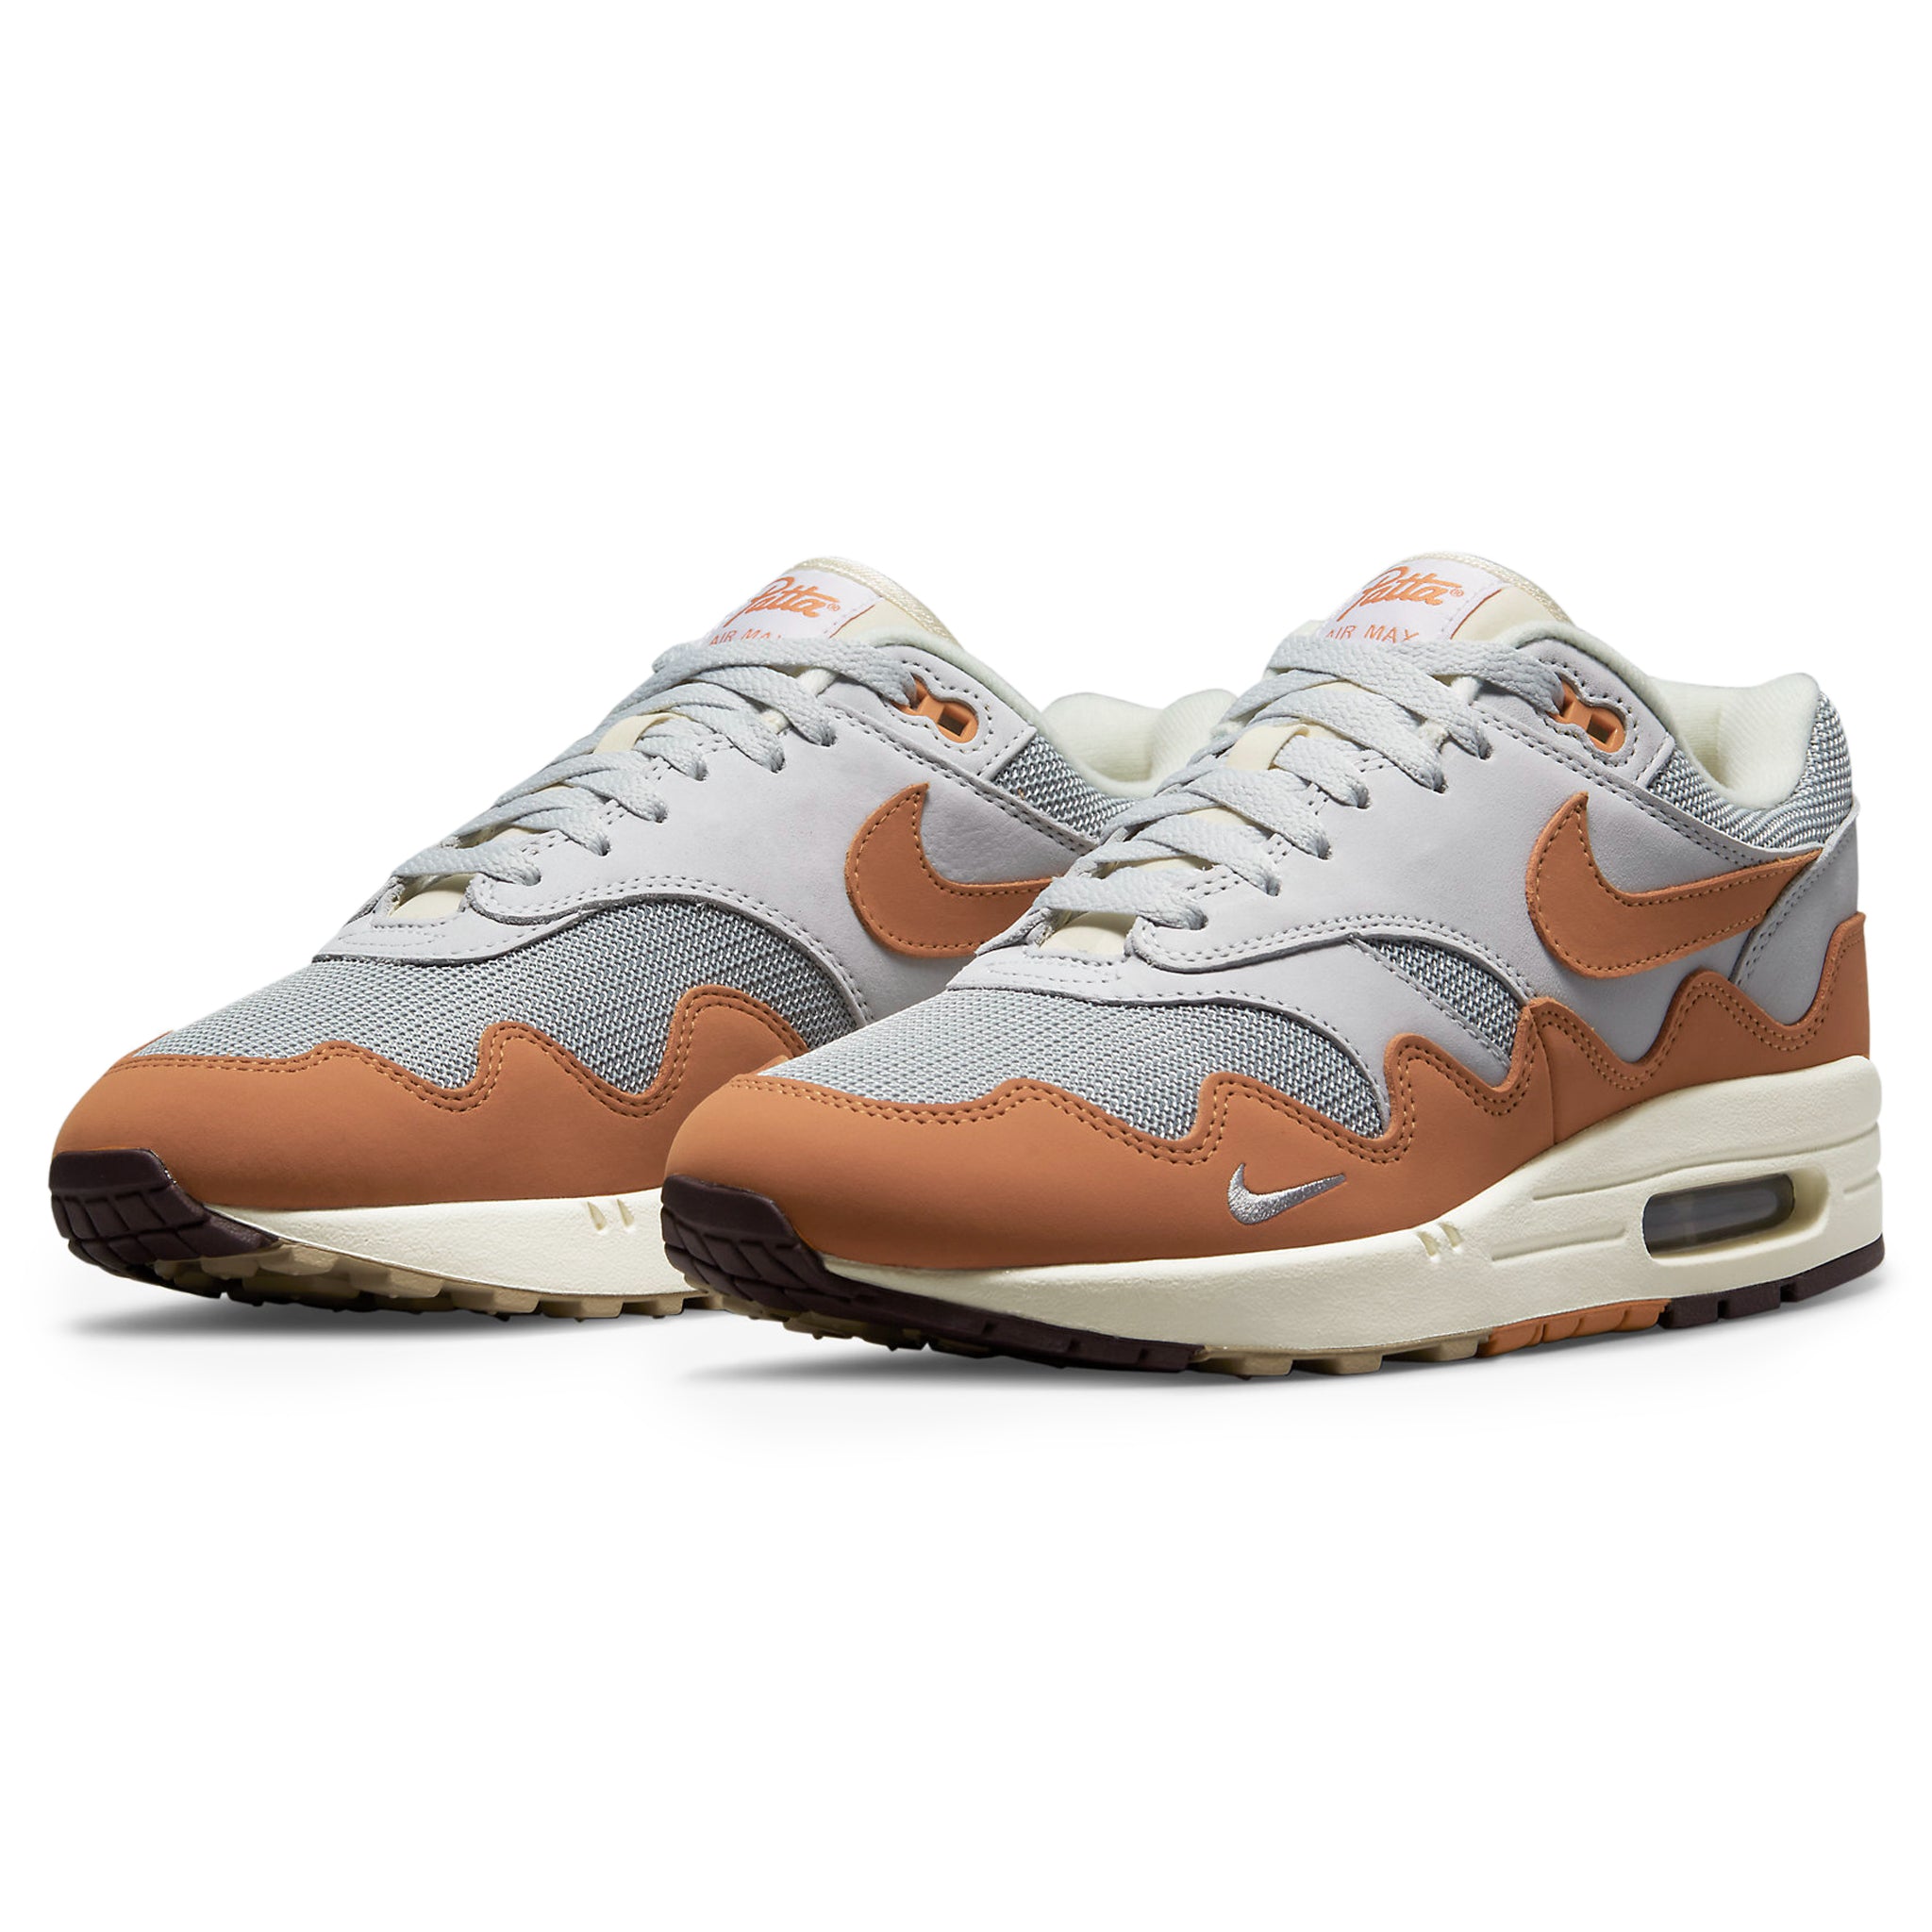 Front side view of Nike Air Max 1 Patta Waves Monarch (With Bracelet) DH1348-001